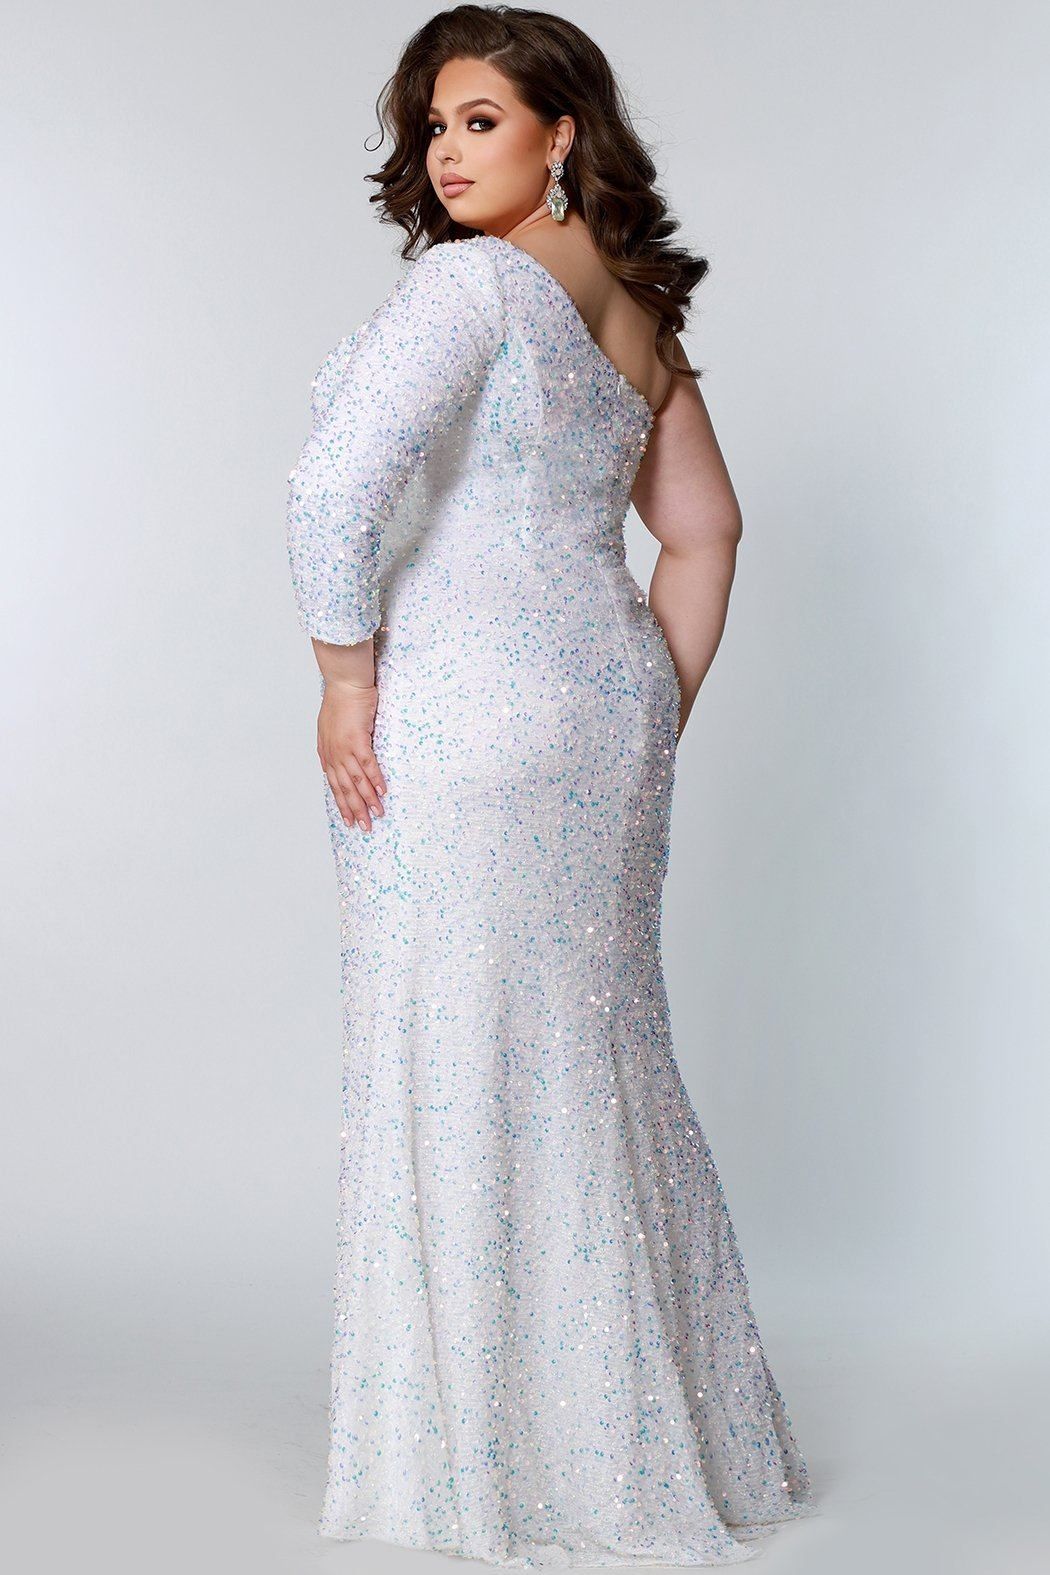 Style SC7319 Sydney's Closet Plus Size 18 Prom White Side Slit Dress on Queenly